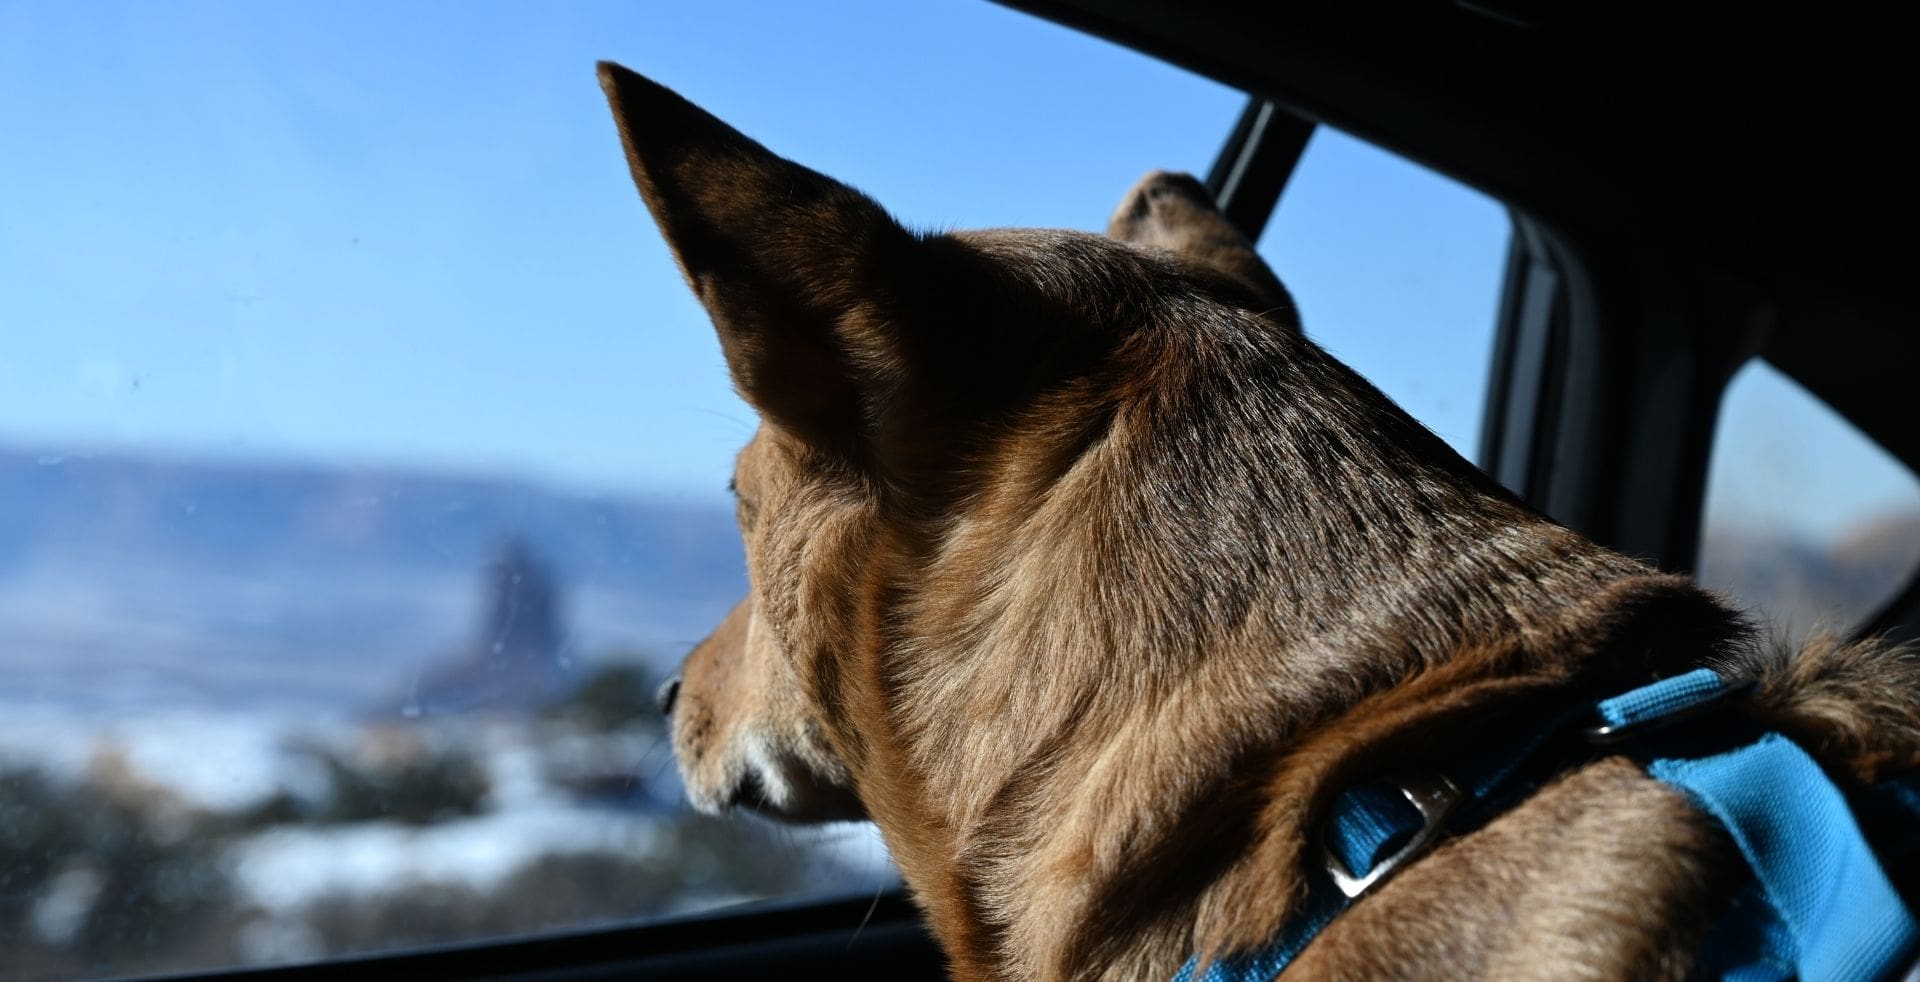 hachi looking out the window, hachi media our work featured image